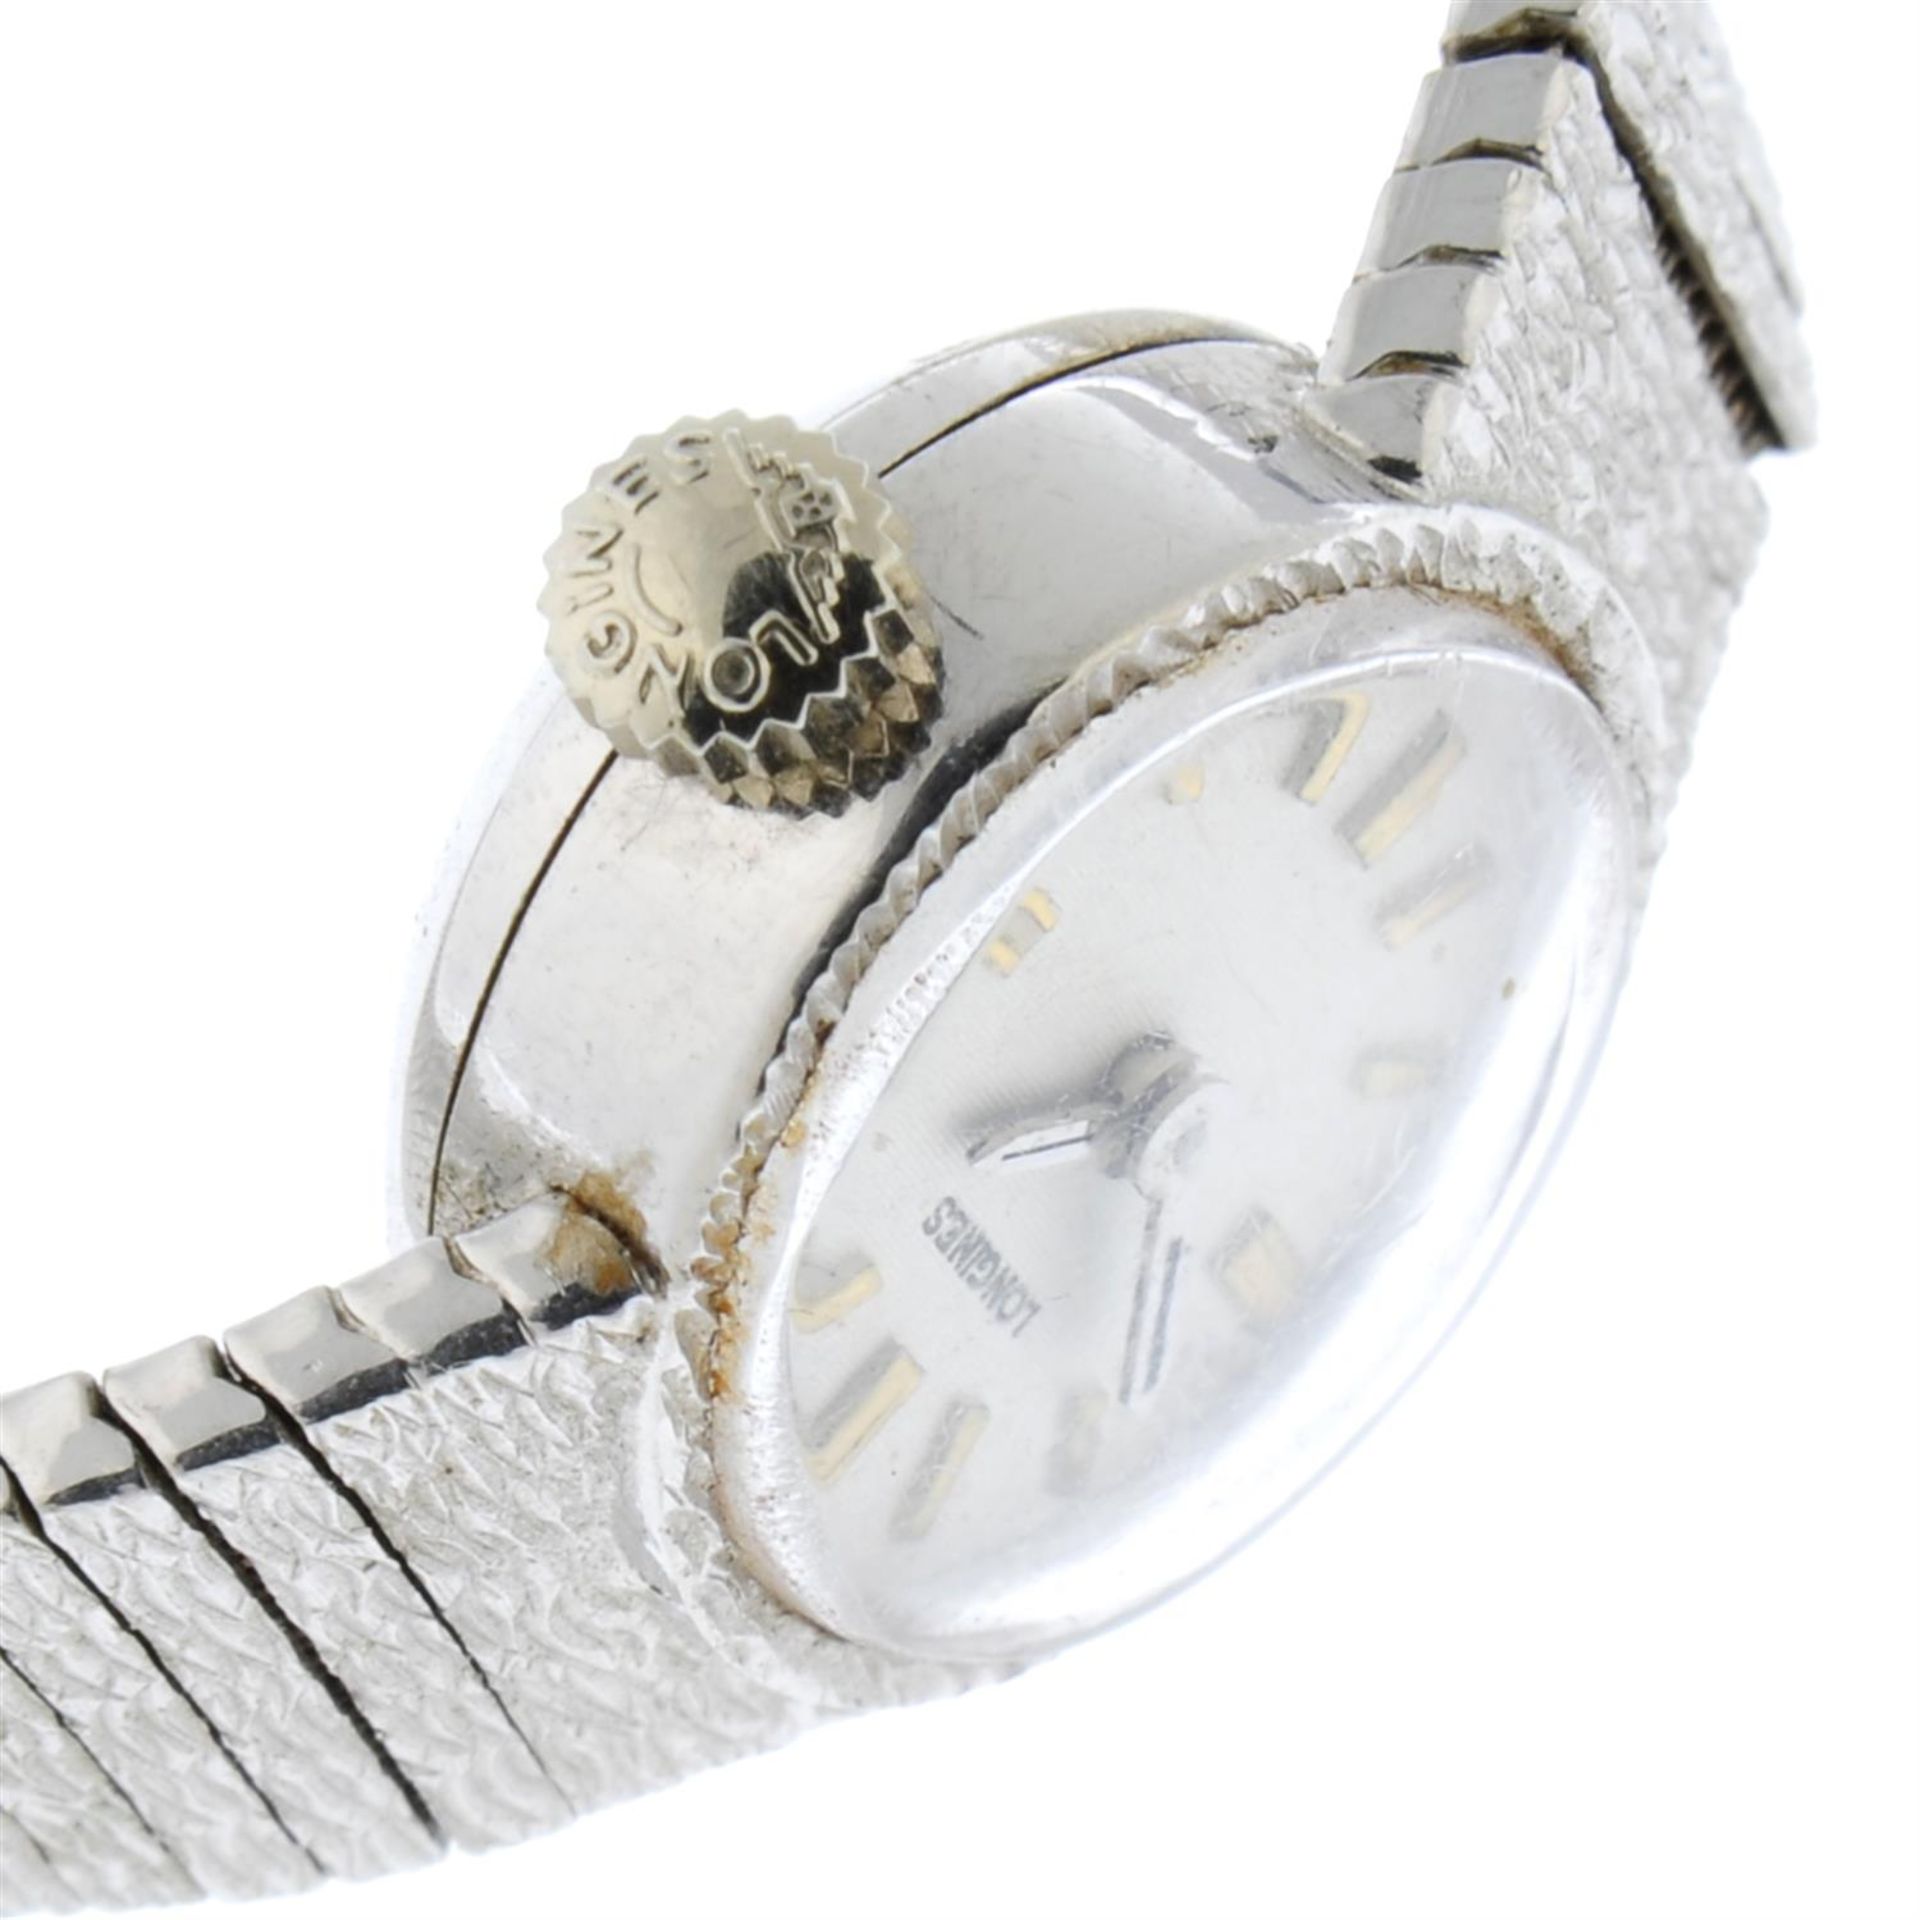 LONGINES - a 9ct white gold bracelet watch, 18mm. - Image 3 of 4